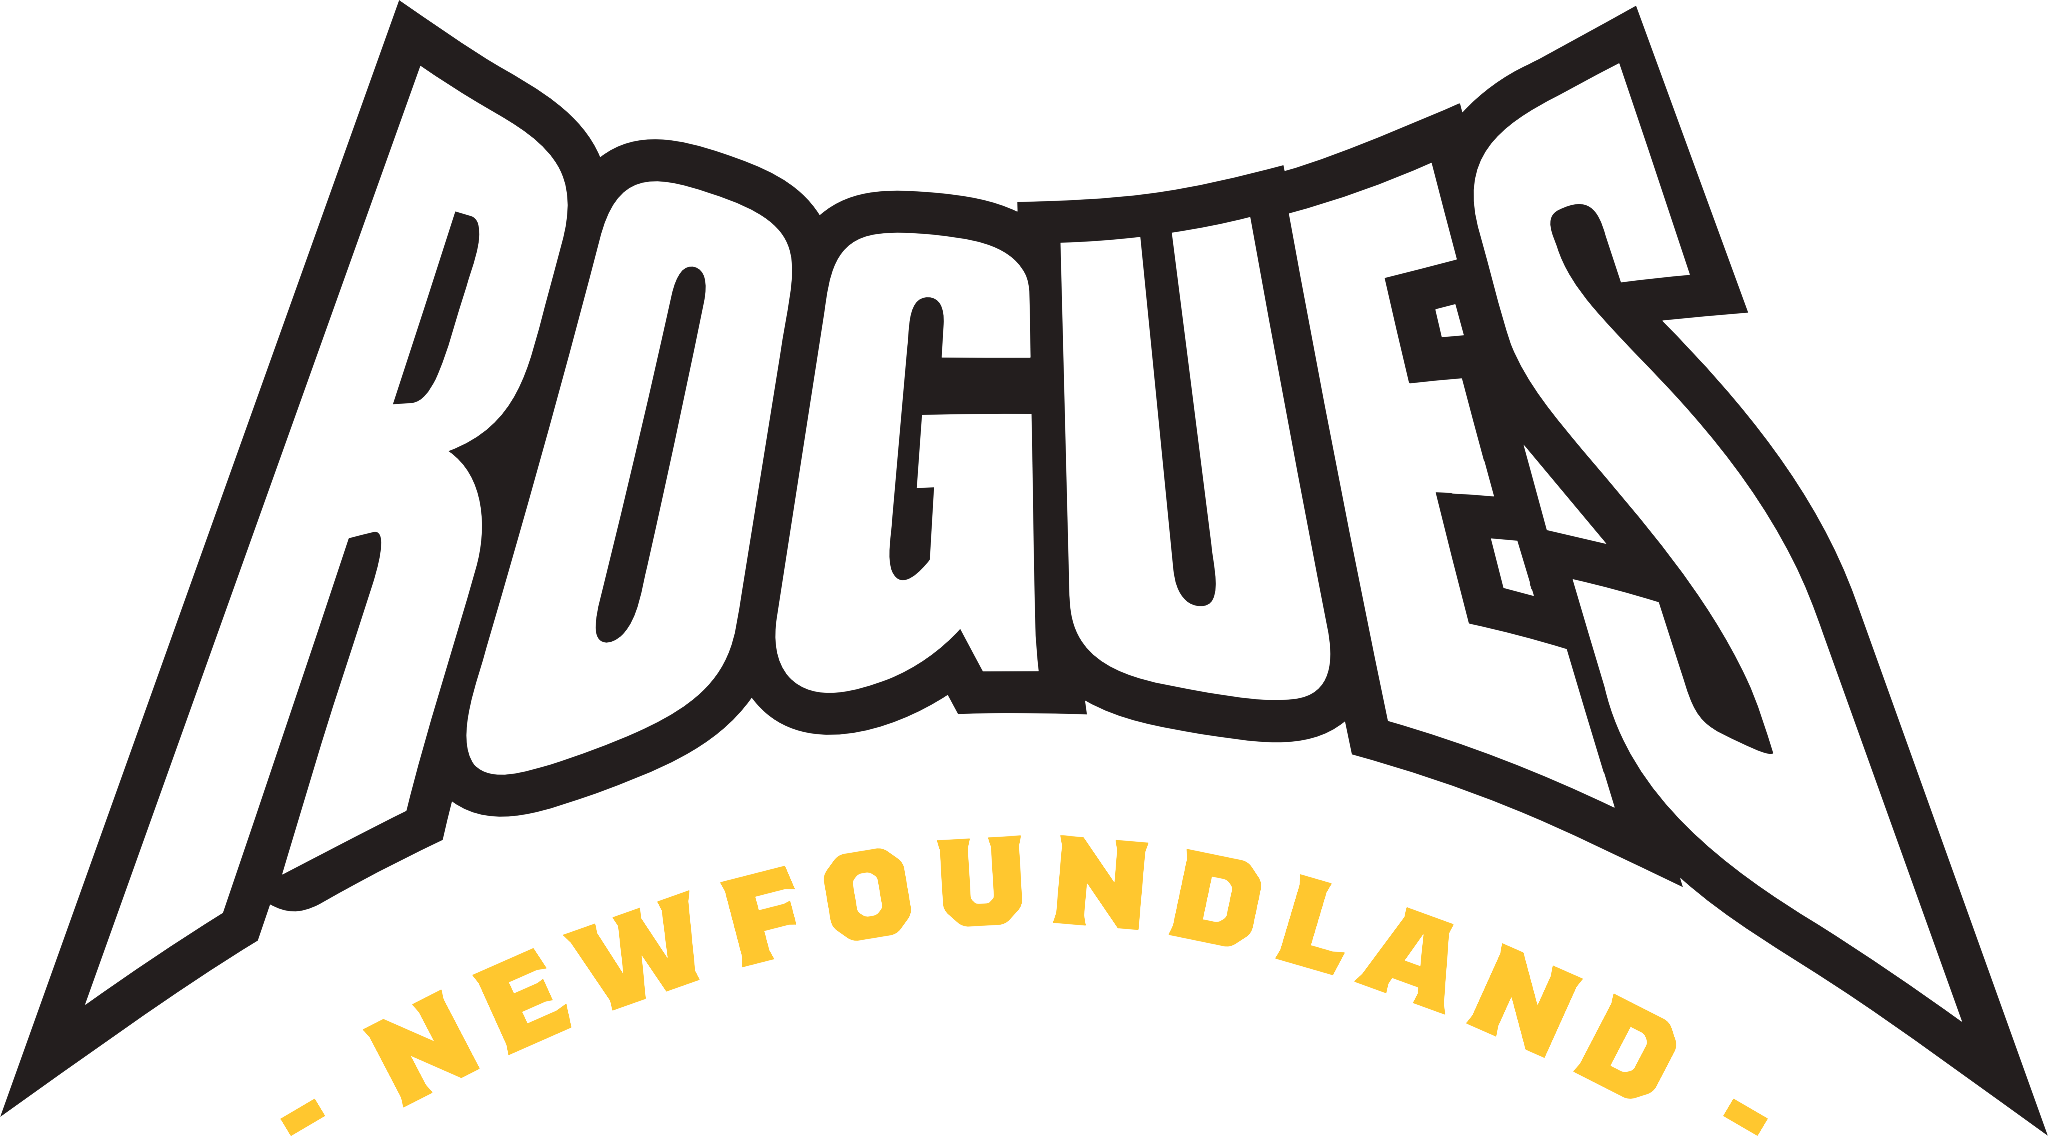 Home - The Newfoundland Rogues